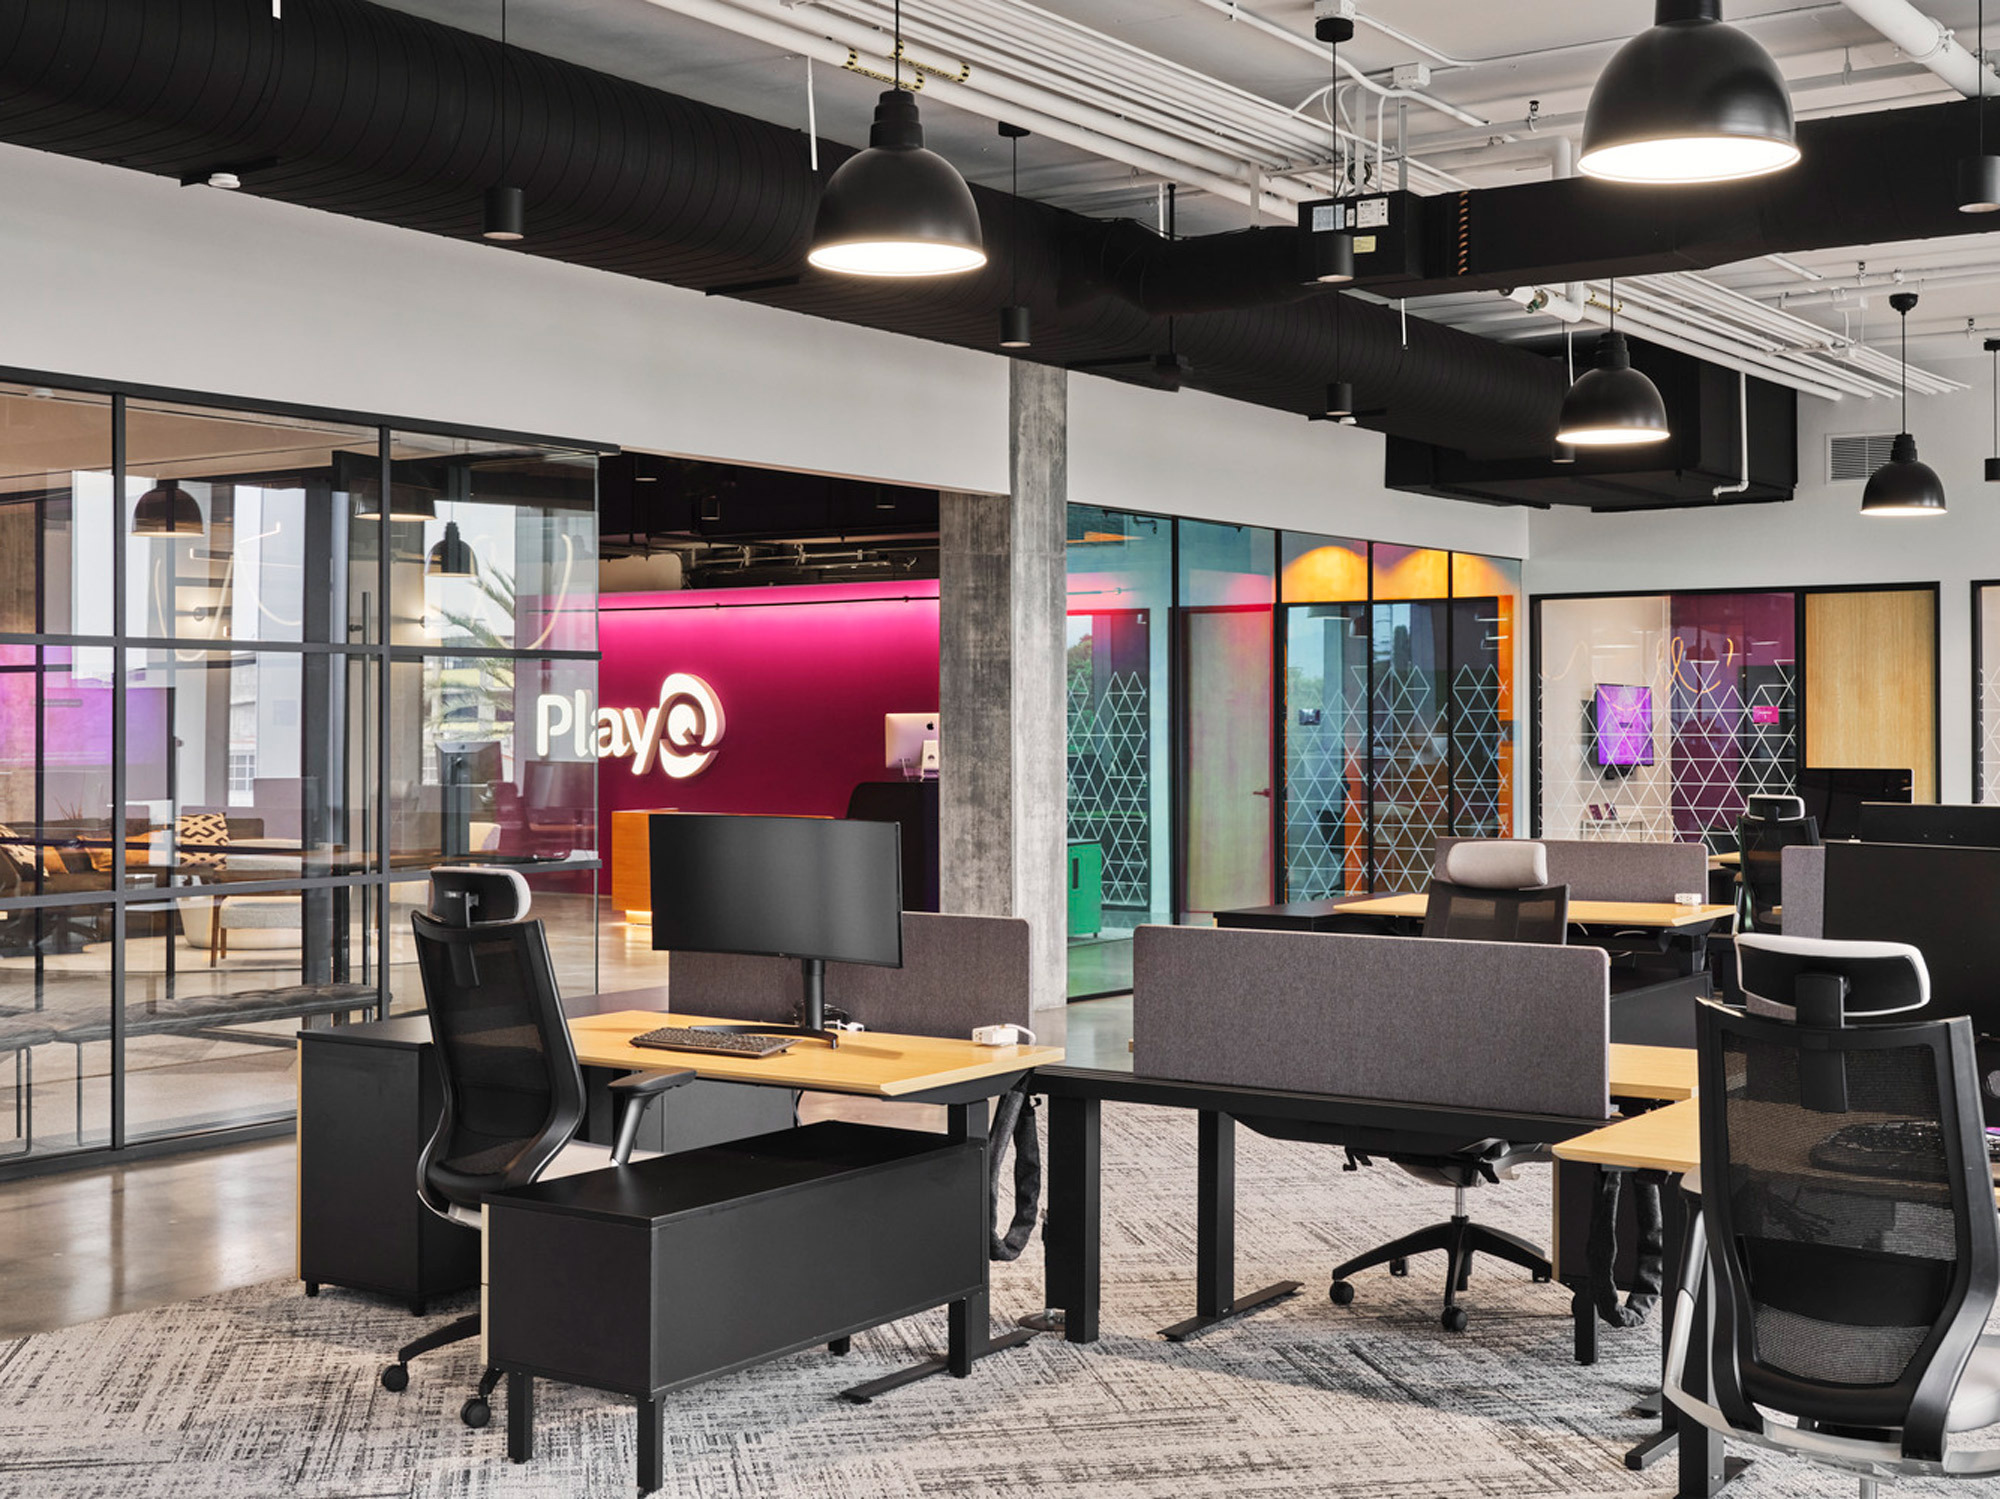 Modern office space featuring ergonomic chairs, sleek black desks, vibrant magenta branding wall, and glass partitions with playful designs contrasting with industrial exposed ceilings and ductwork.